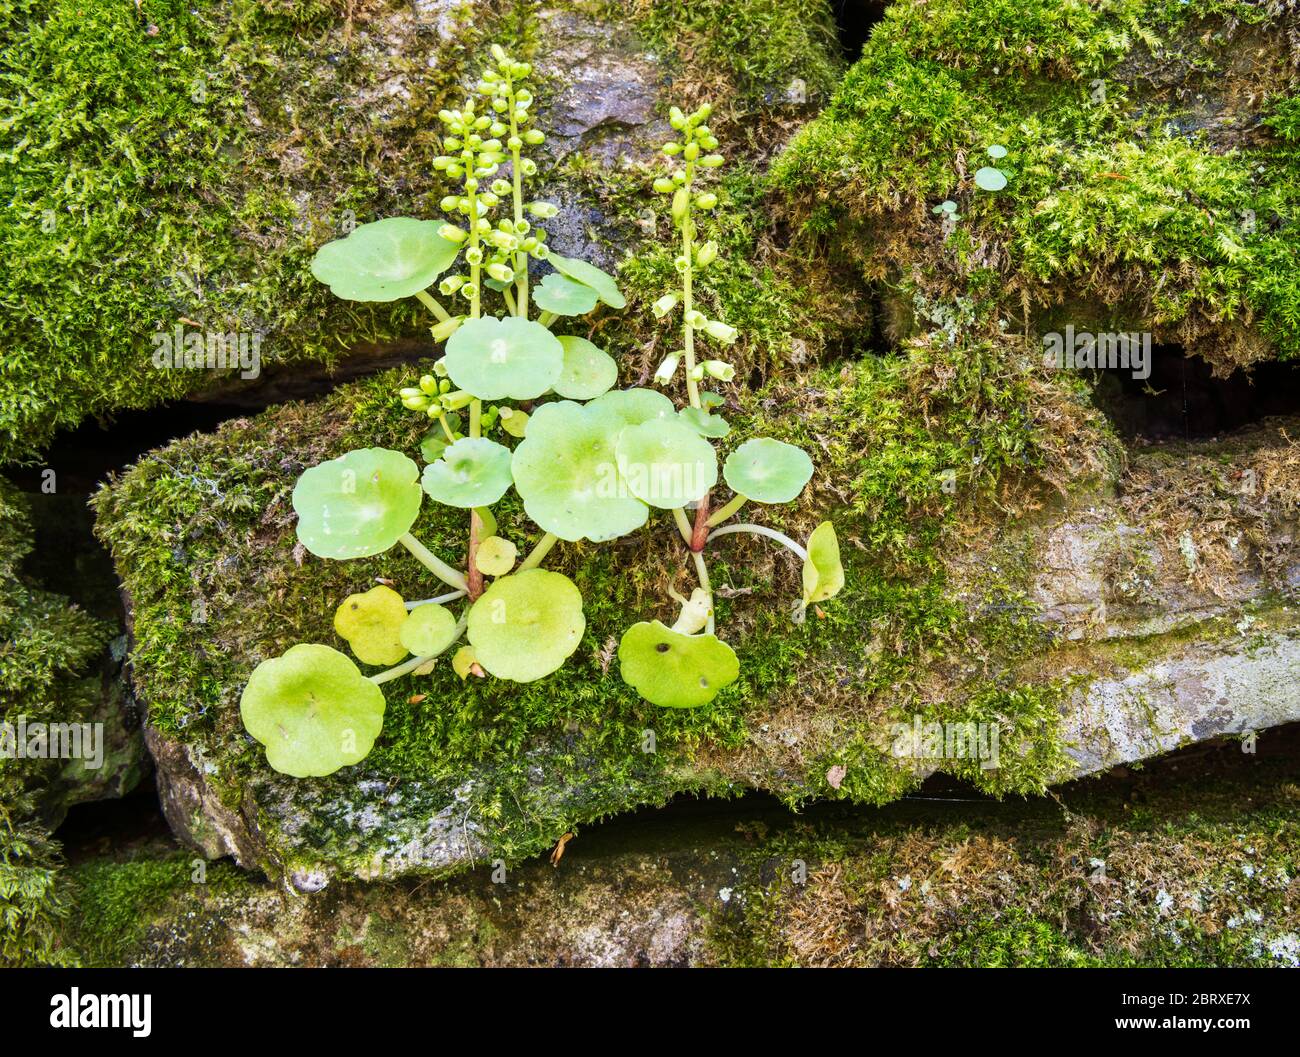 Pennywort or Navelwort (Umbilicus rupestris) growing on a mossy wall near the East Okement River, Dartmoor National Park, Devon, England, UK. Stock Photo